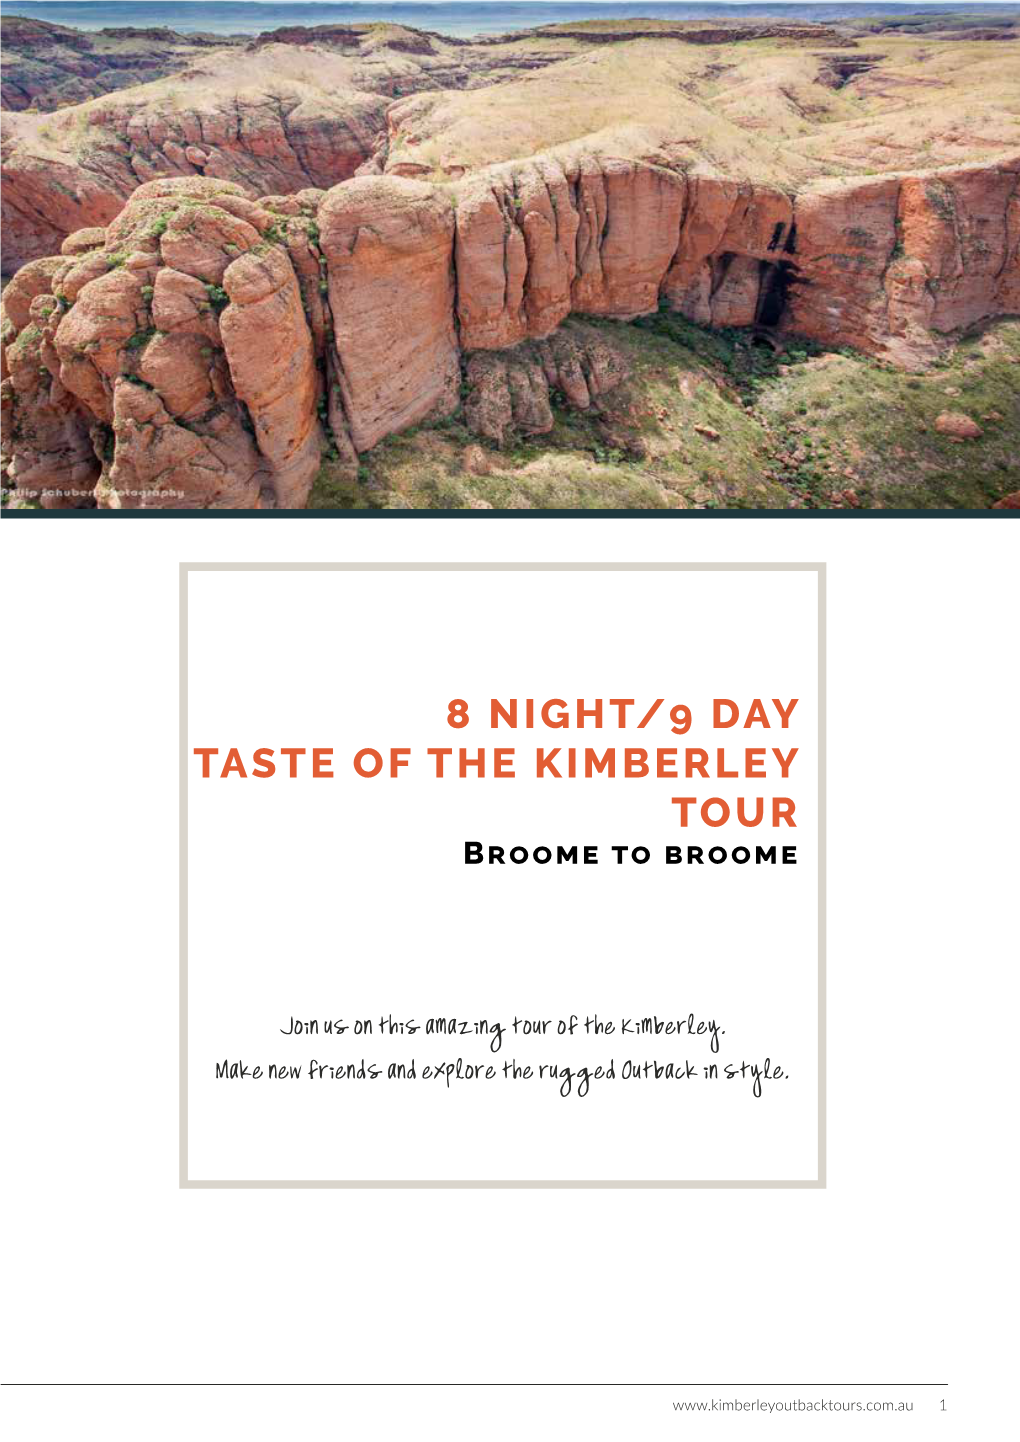 8 NIGHT/9 DAY TASTE of the KIMBERLEY TOUR Broome to Broome